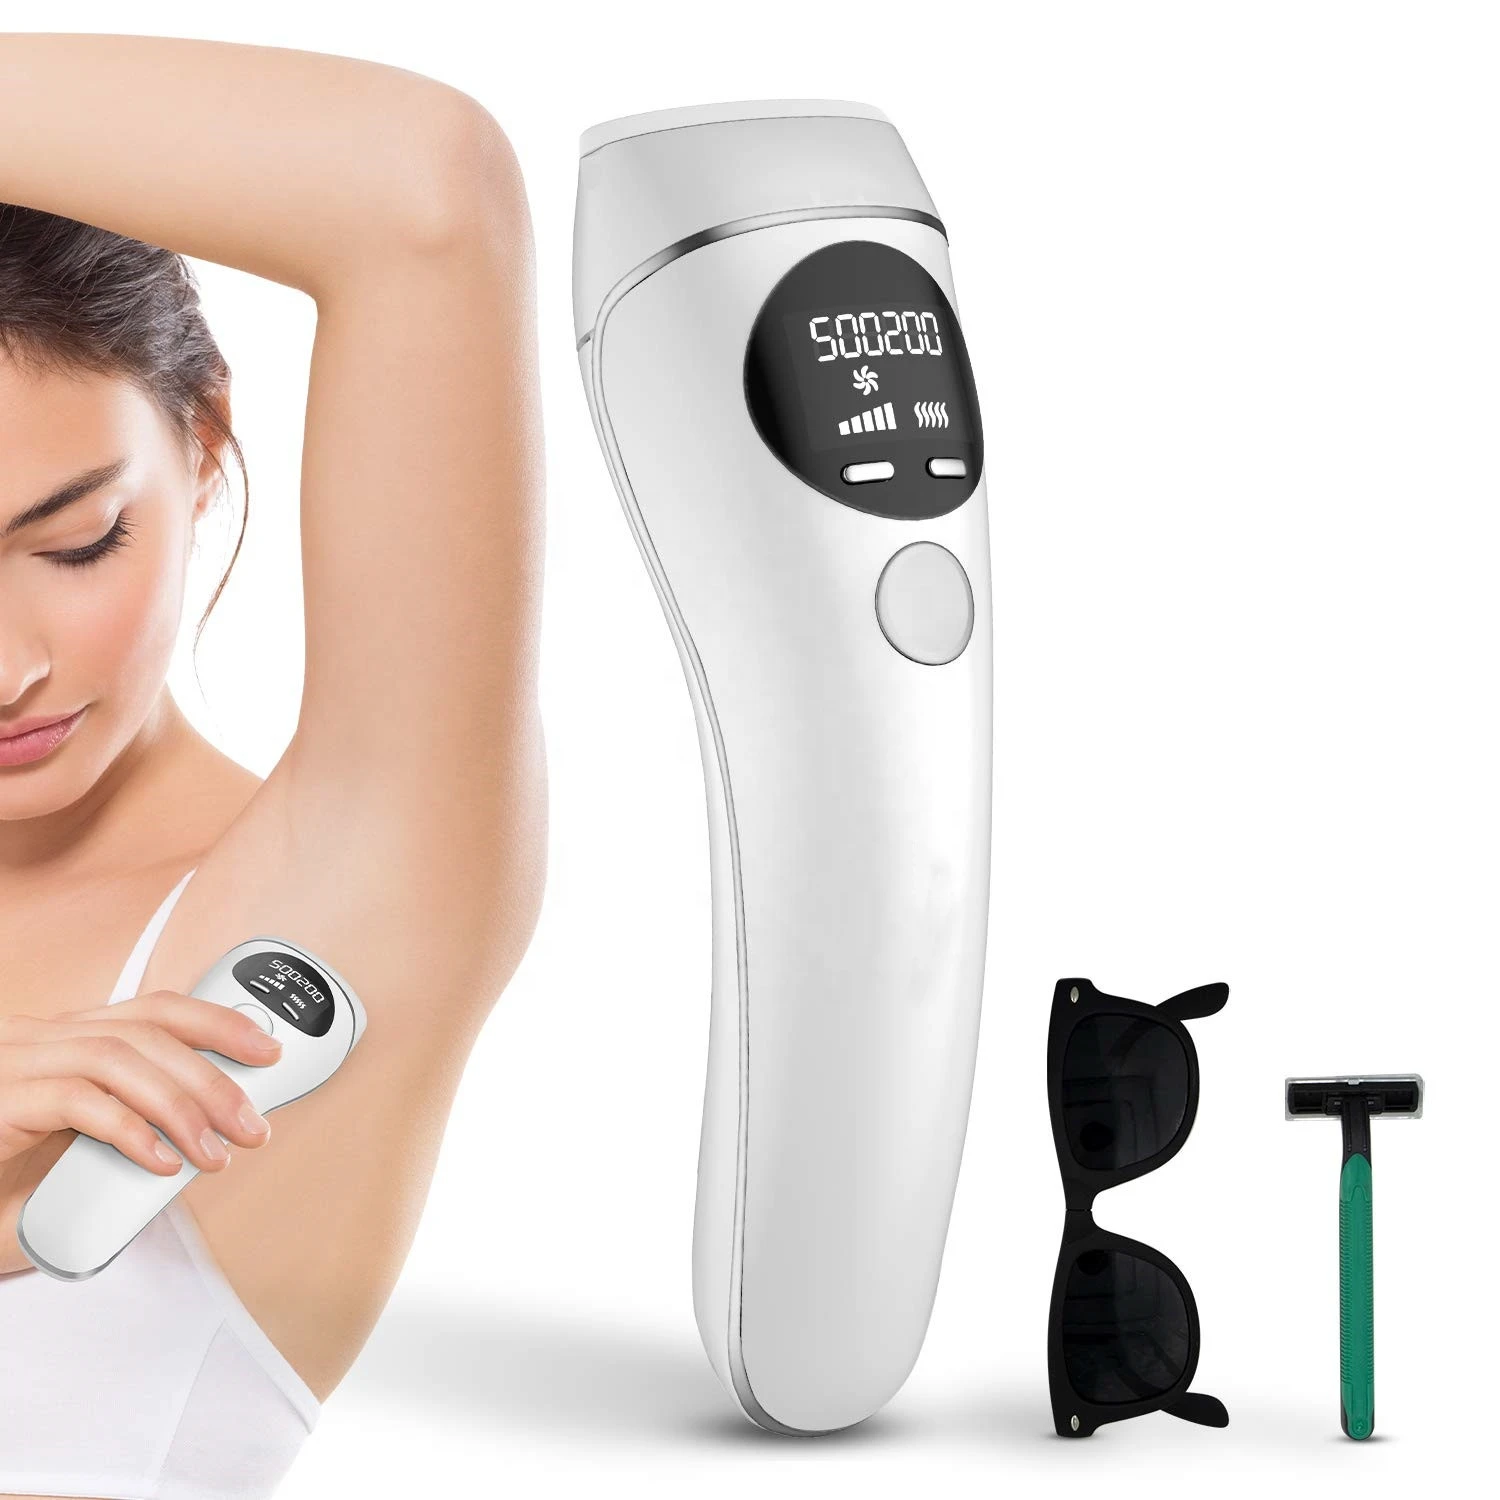 Ipl Hair Removal Device 5 Gears Adjustable Portable Freezing Point  Permanent Painless Depilation Epilator With Pulsed Light - Epilator -  AliExpress